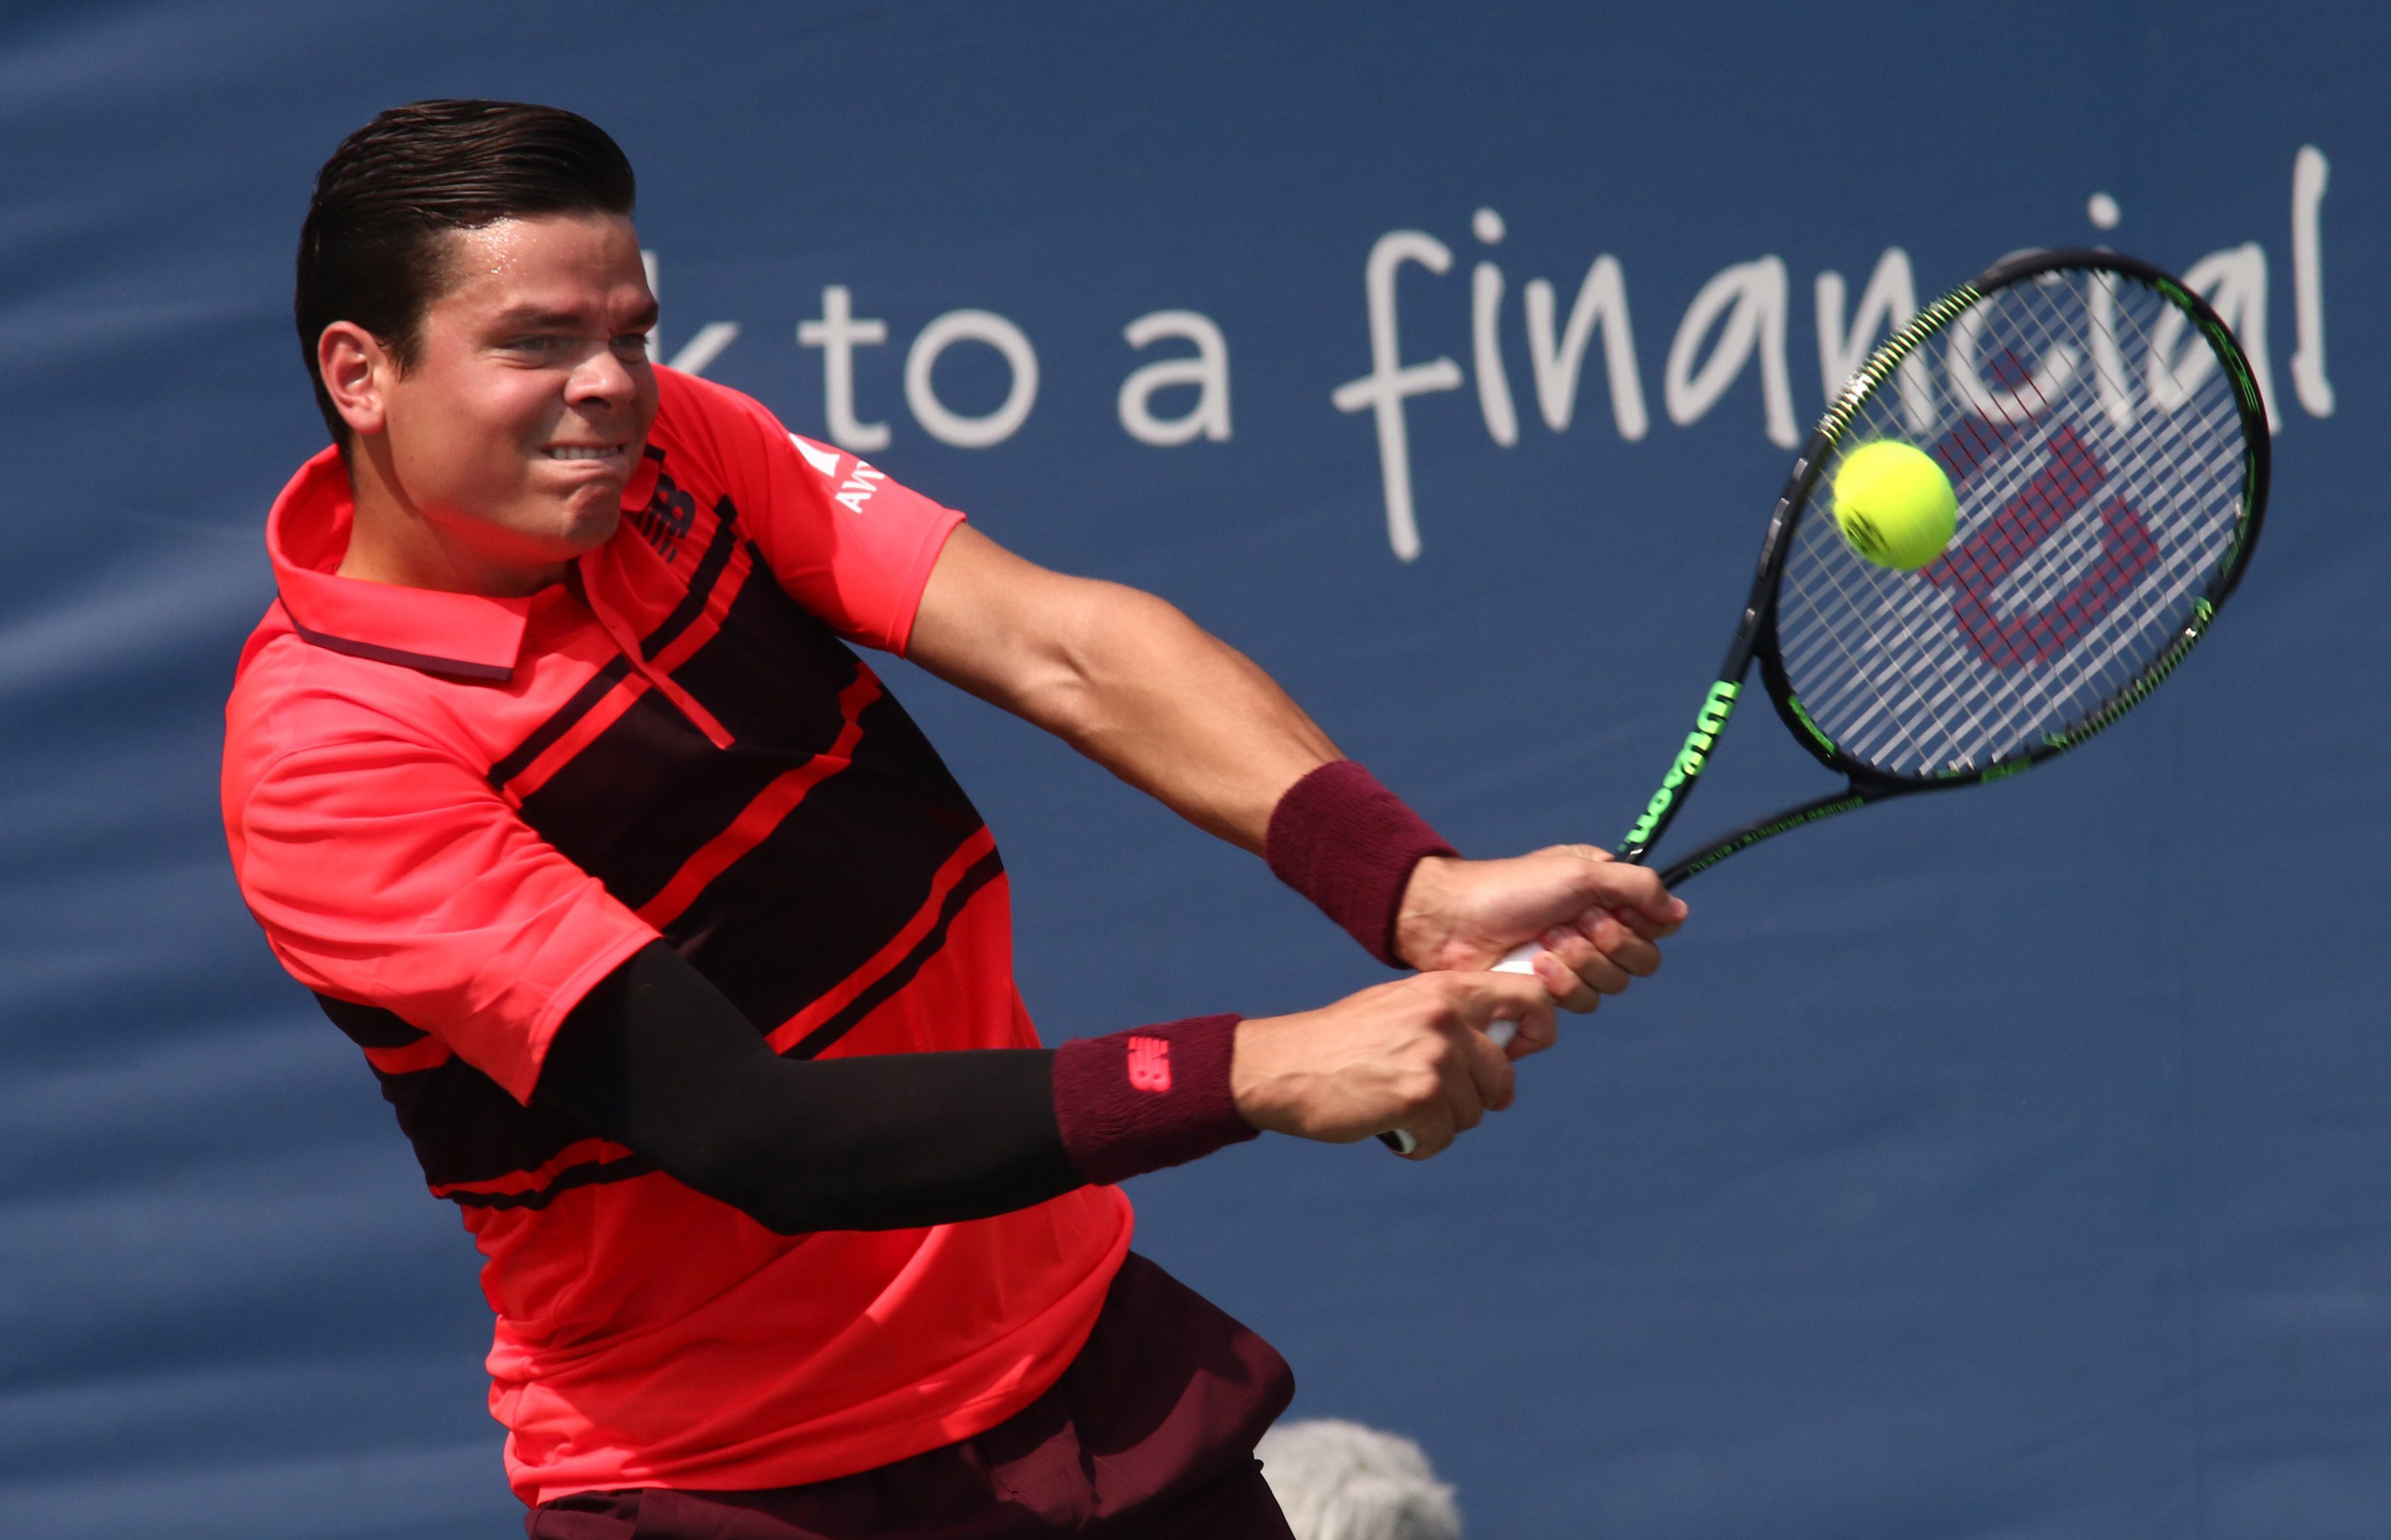 Milos Raonic, of Canada, returns the ball to Feliciano Lopez, of Spain, at the Western & Southern Open tennis tournament, Tuesday, Aug. 18, 2015, in Mason, Ohio. (AP Photo/Tom Uhlman)